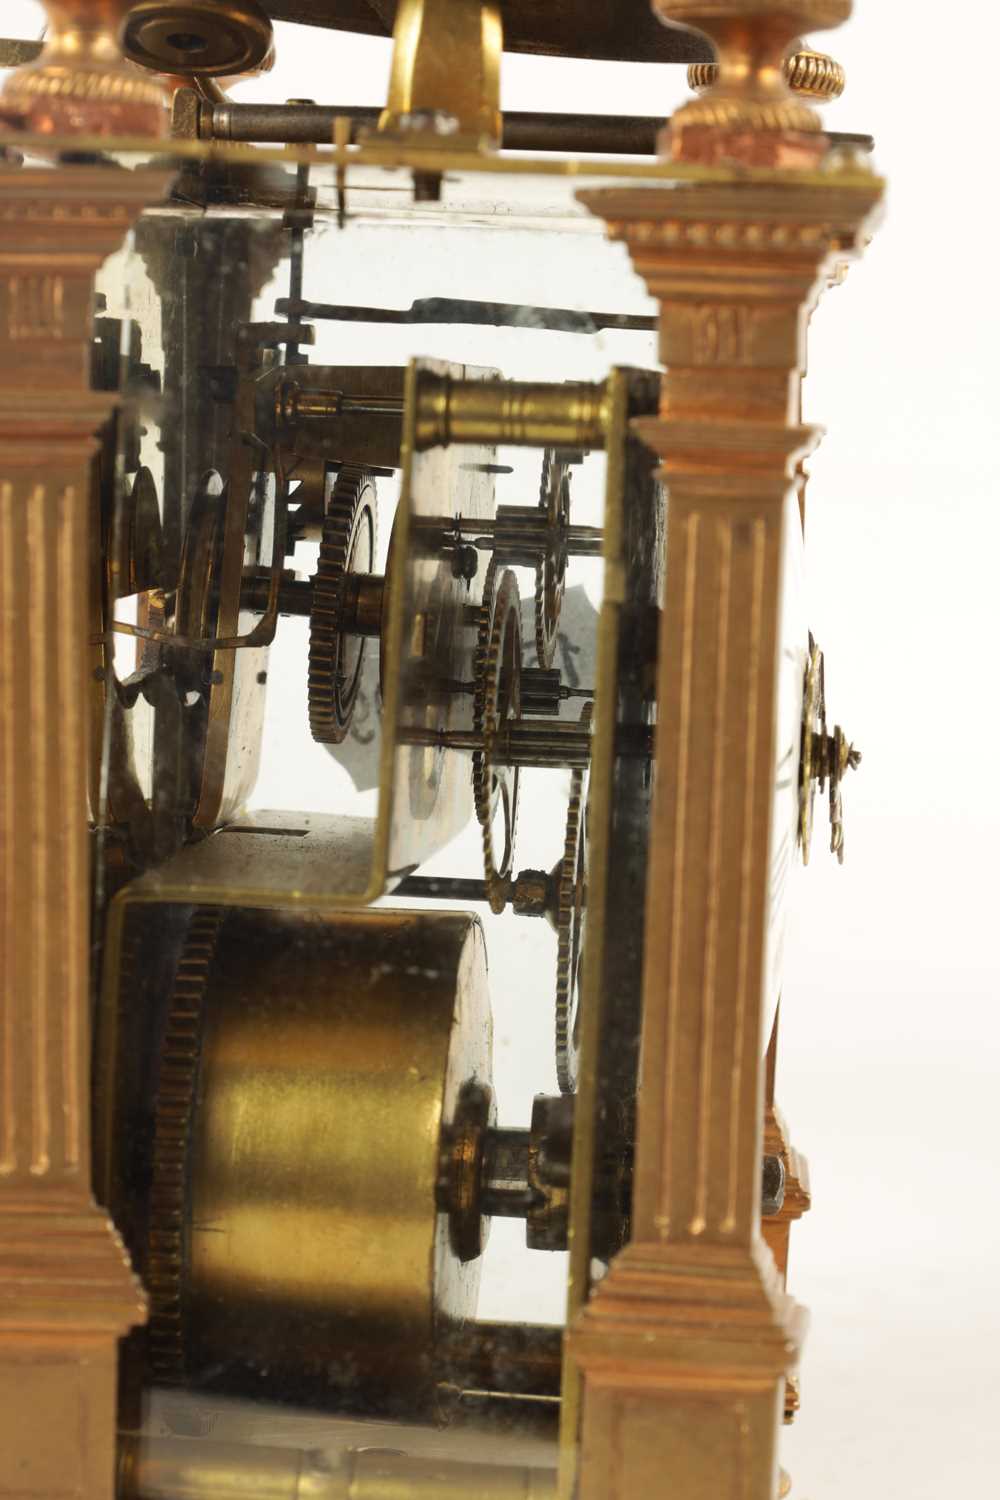 AN EARLY 19TH CENTURY FRENCH CAPUCINE STYLE CARRIAGE/MANTEL CLOCK - Image 8 of 9